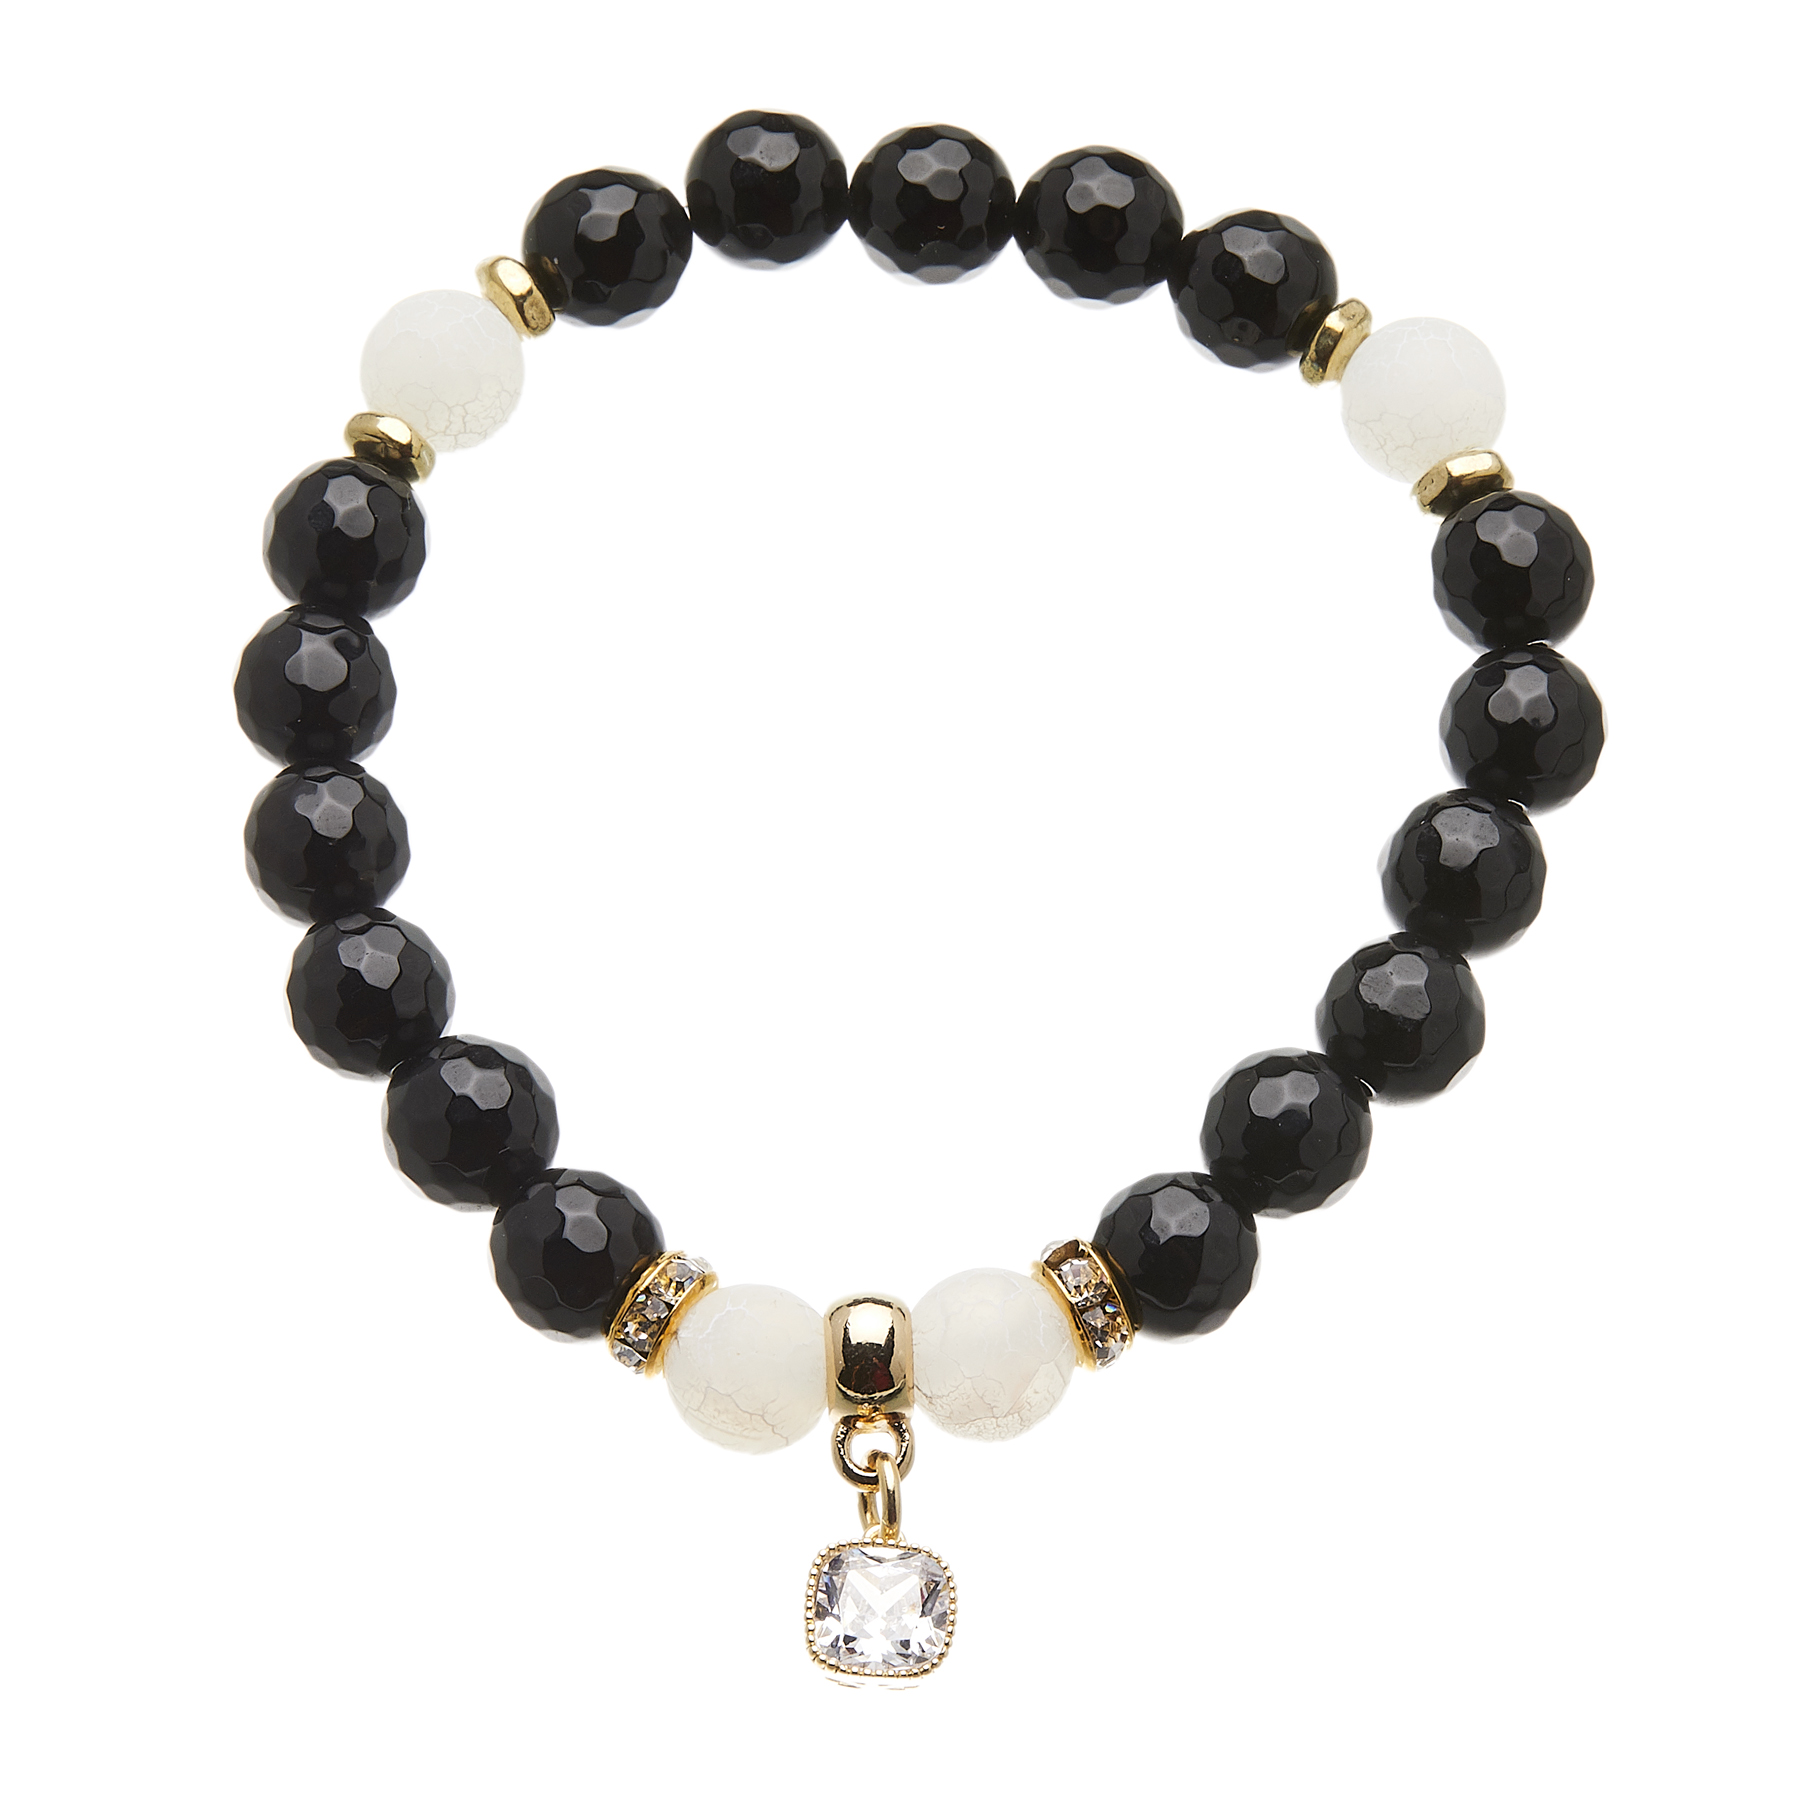 Facet black agate beaded Bracelet with a gold crystal charm - Rae B13